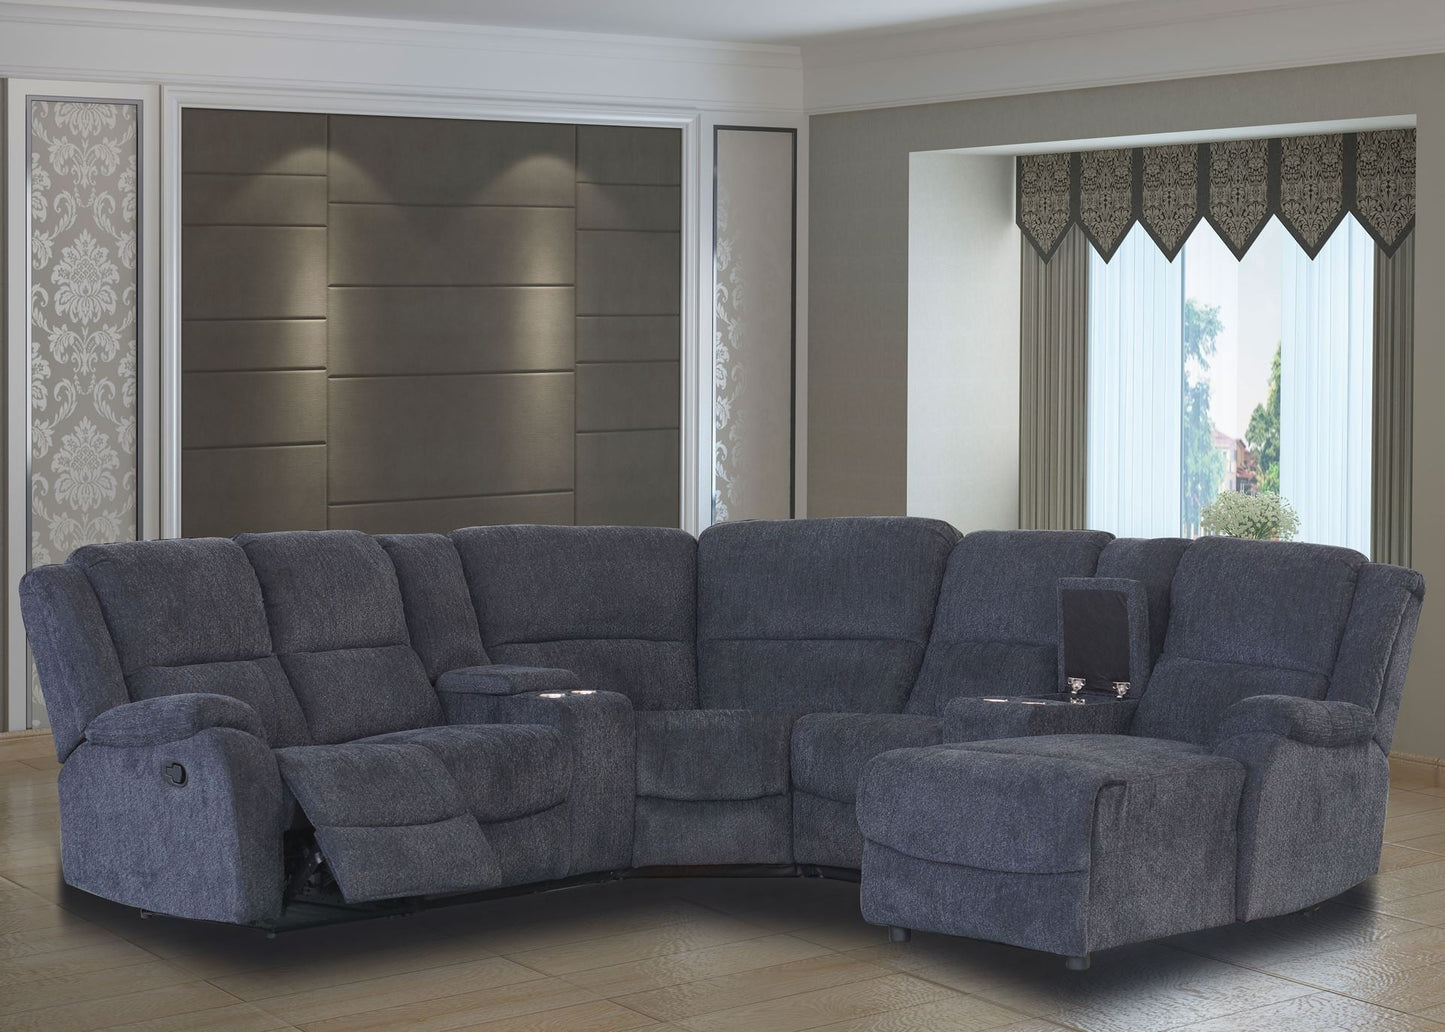 0035475 Alto Sectional Modular Reclining Sofa With Chaise Cup Holders And Storage ?v=1660534324&width=1445